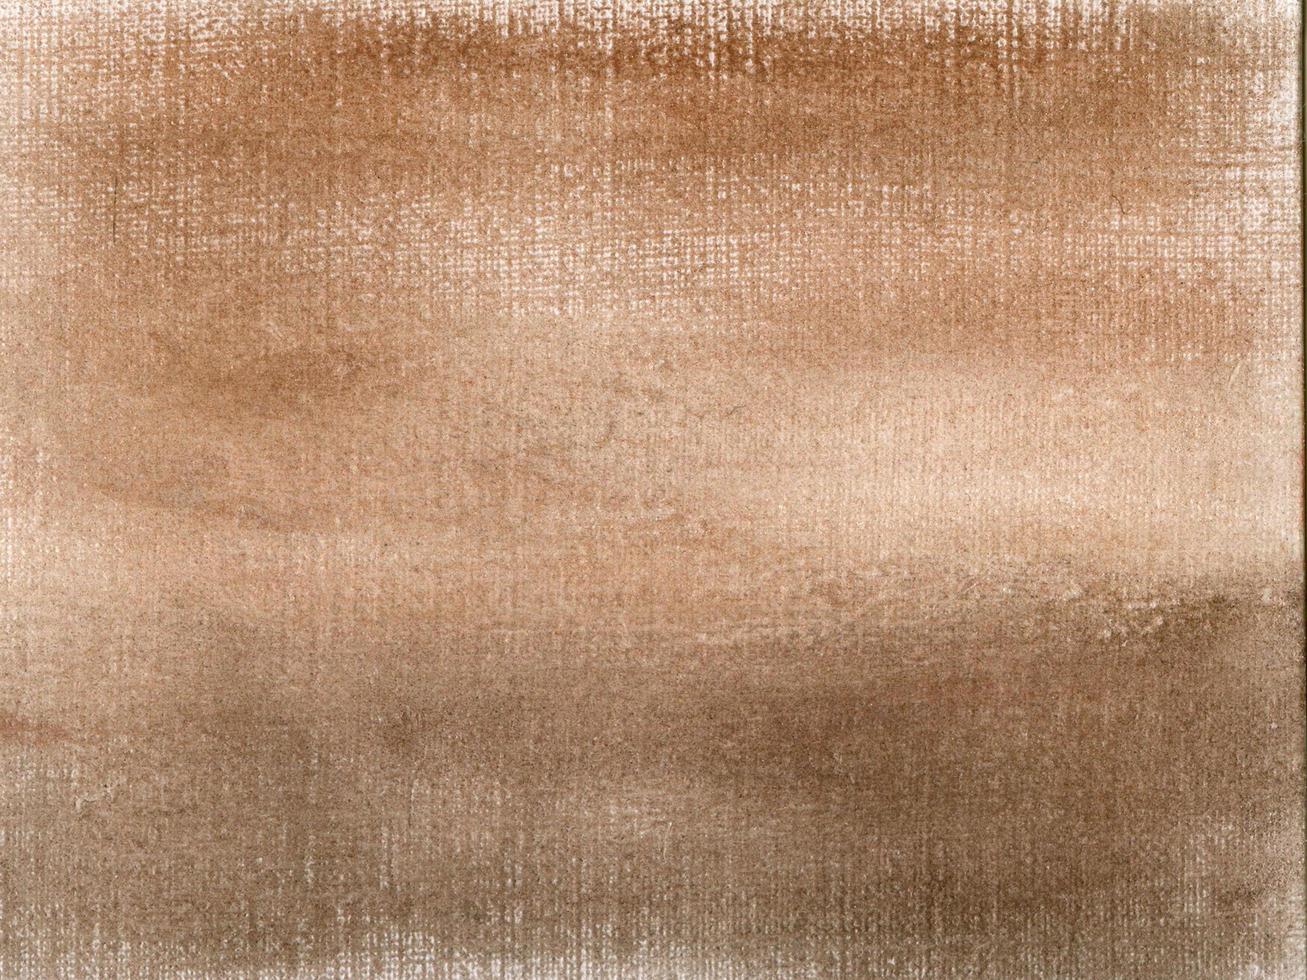 Pastel beige brown abstract texture photo